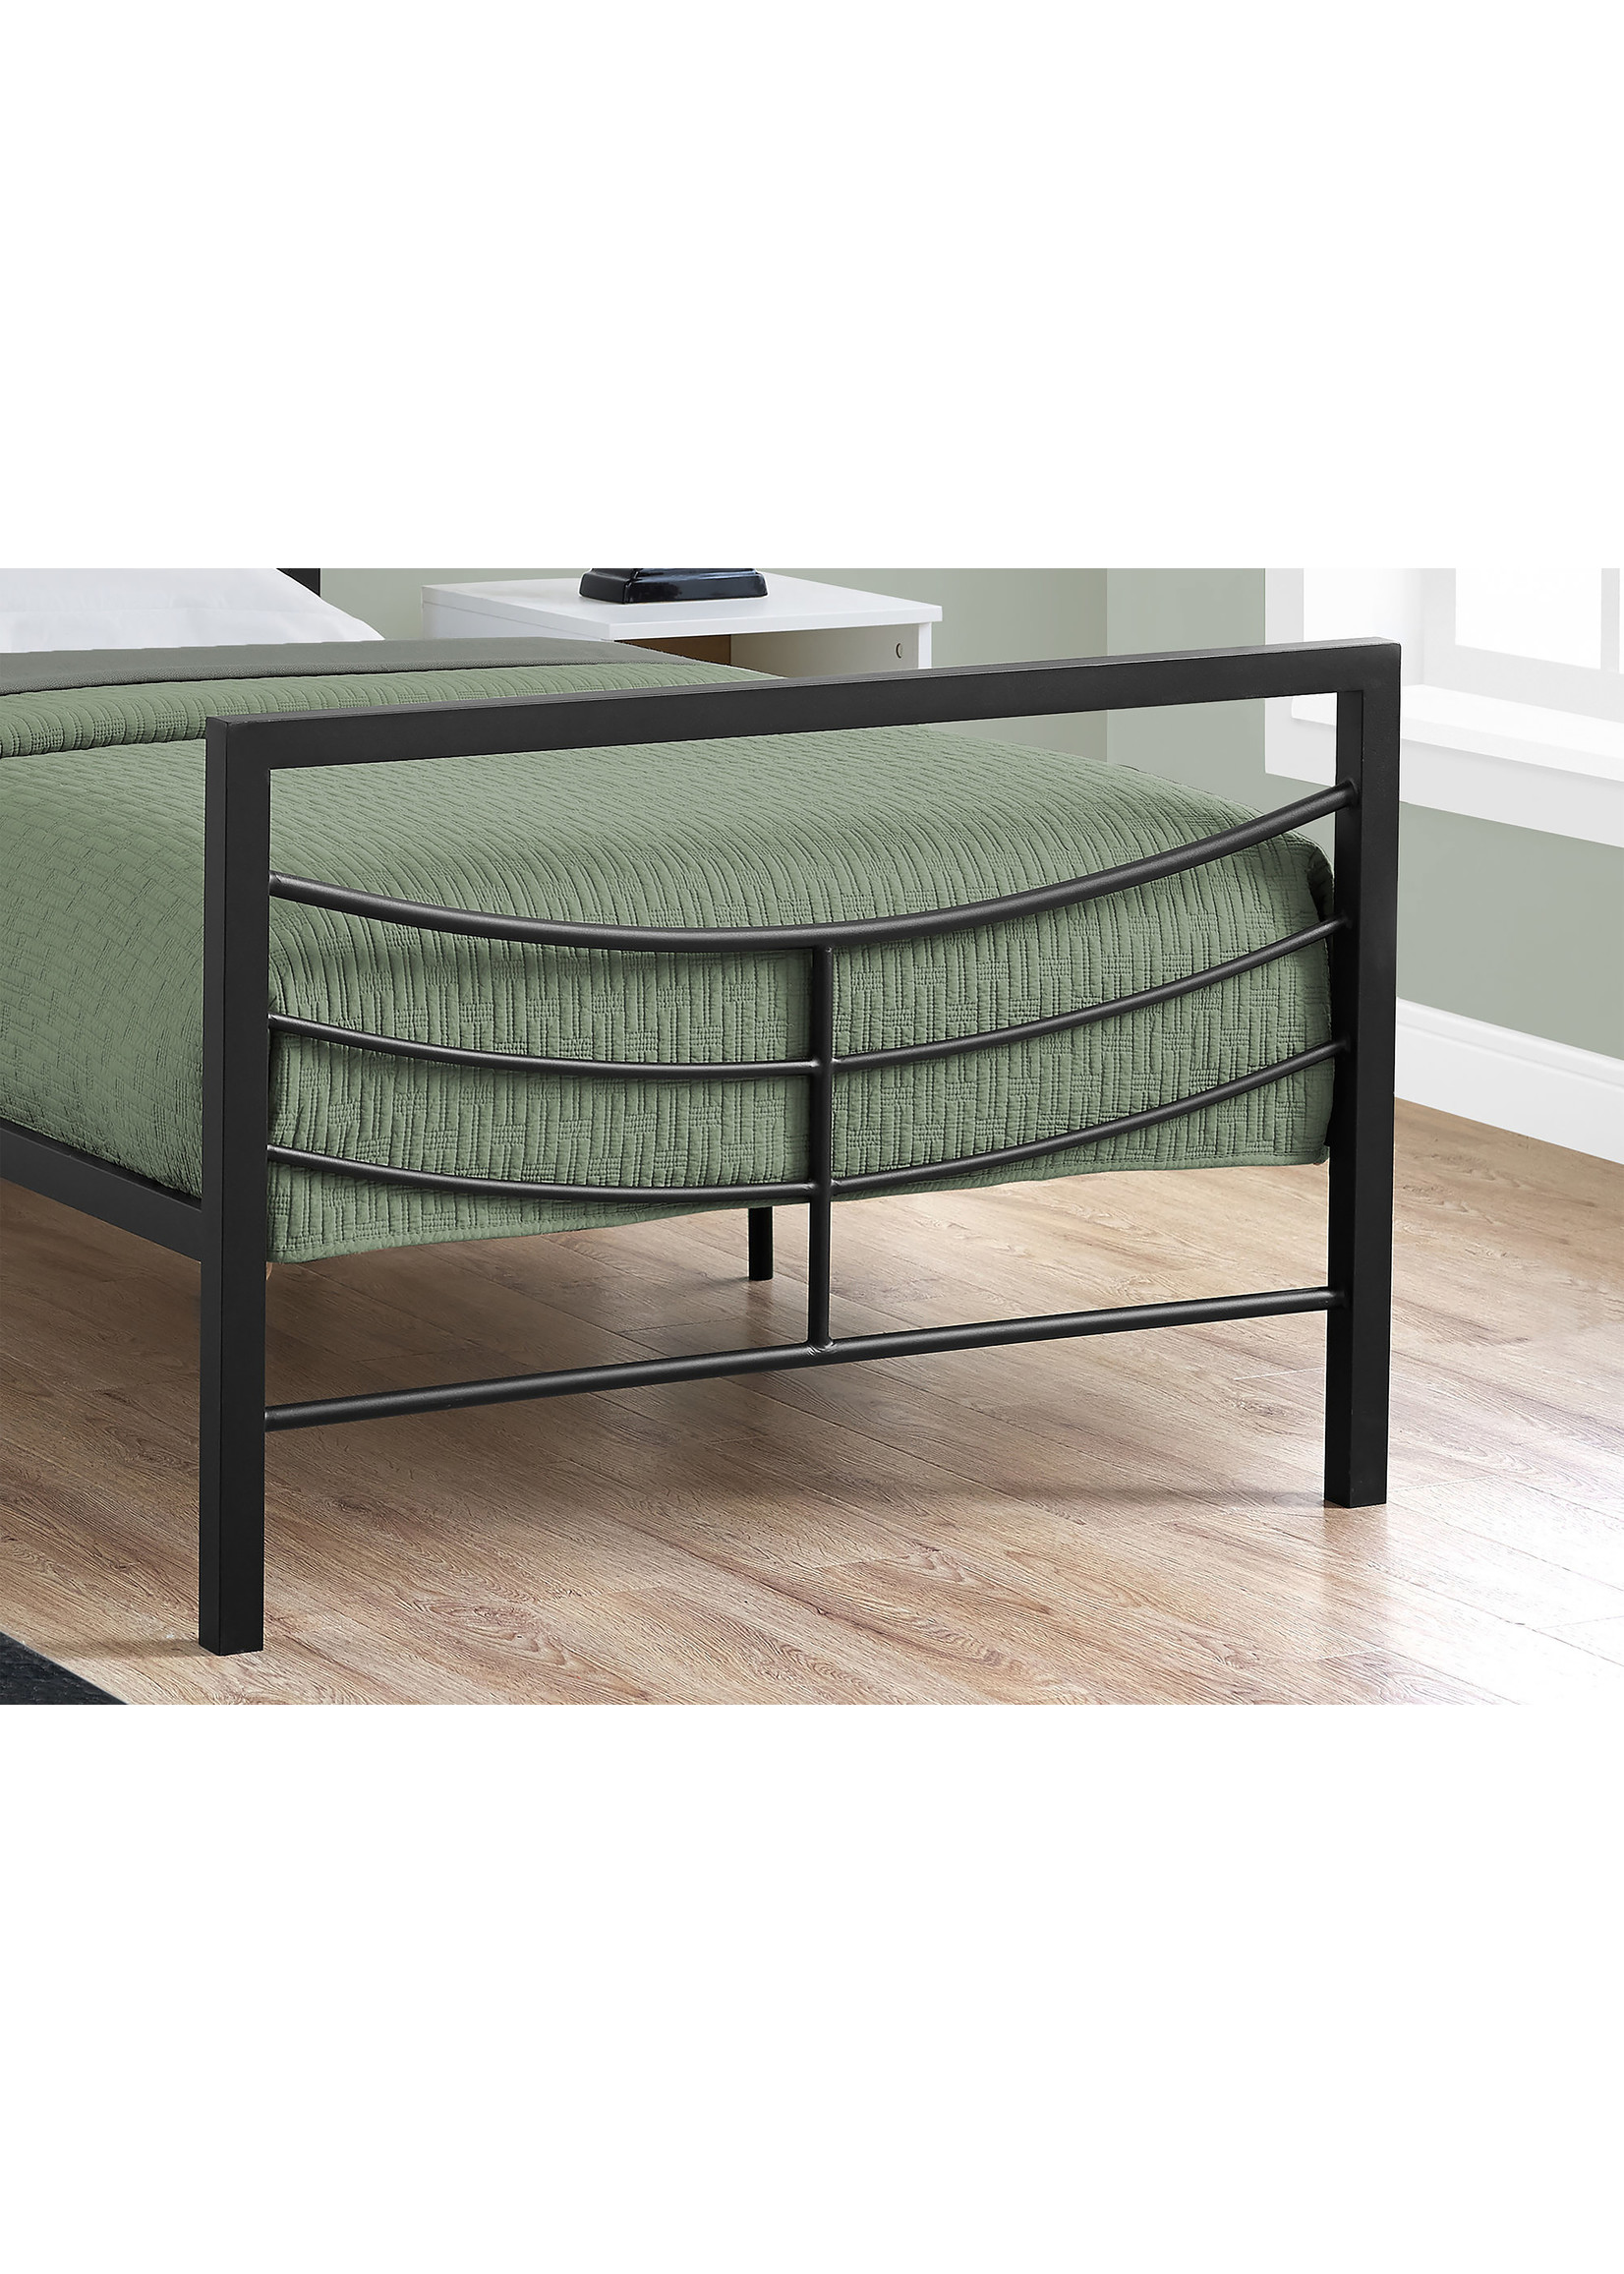 BED - TWIN SIZE / BLACK METAL FRAME ONLY